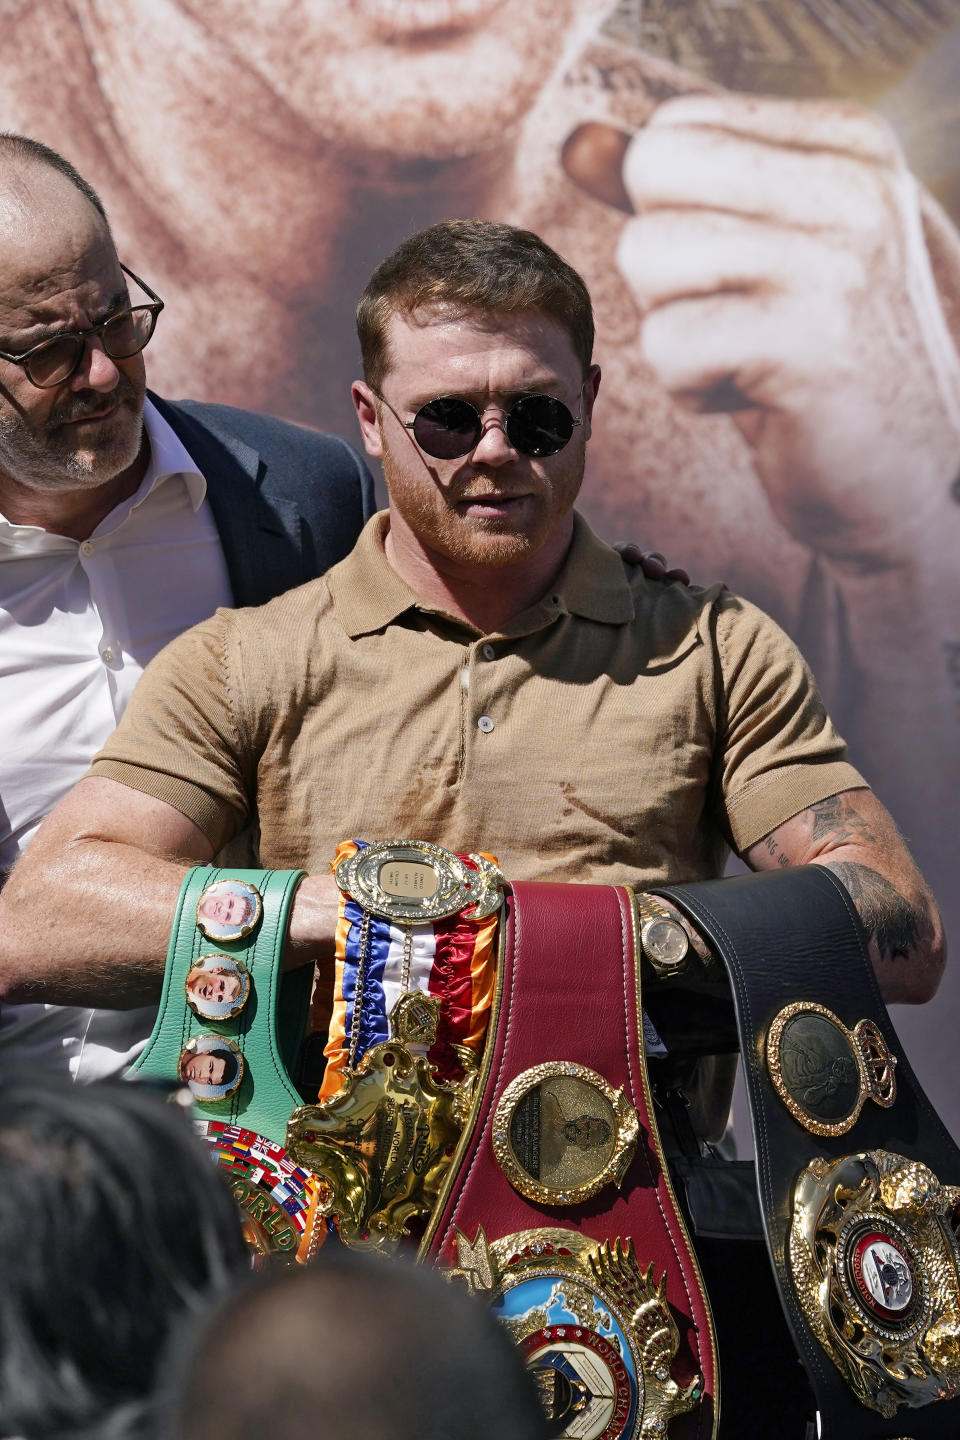 Unified WBC/WBO/WBA super middleweight champion Canelo Alvarez poses with his belts during a news conference Tuesday, Sept. 21, 2021, in Beverly Hills, Calif. to announce his 168-pound title bout against undefeated IBF Super Middleweight Champion Caleb Plant. The fight is scheduled for Saturday, Nov. 6 in Las Vegas. (AP Photo/Mark J. Terrill)